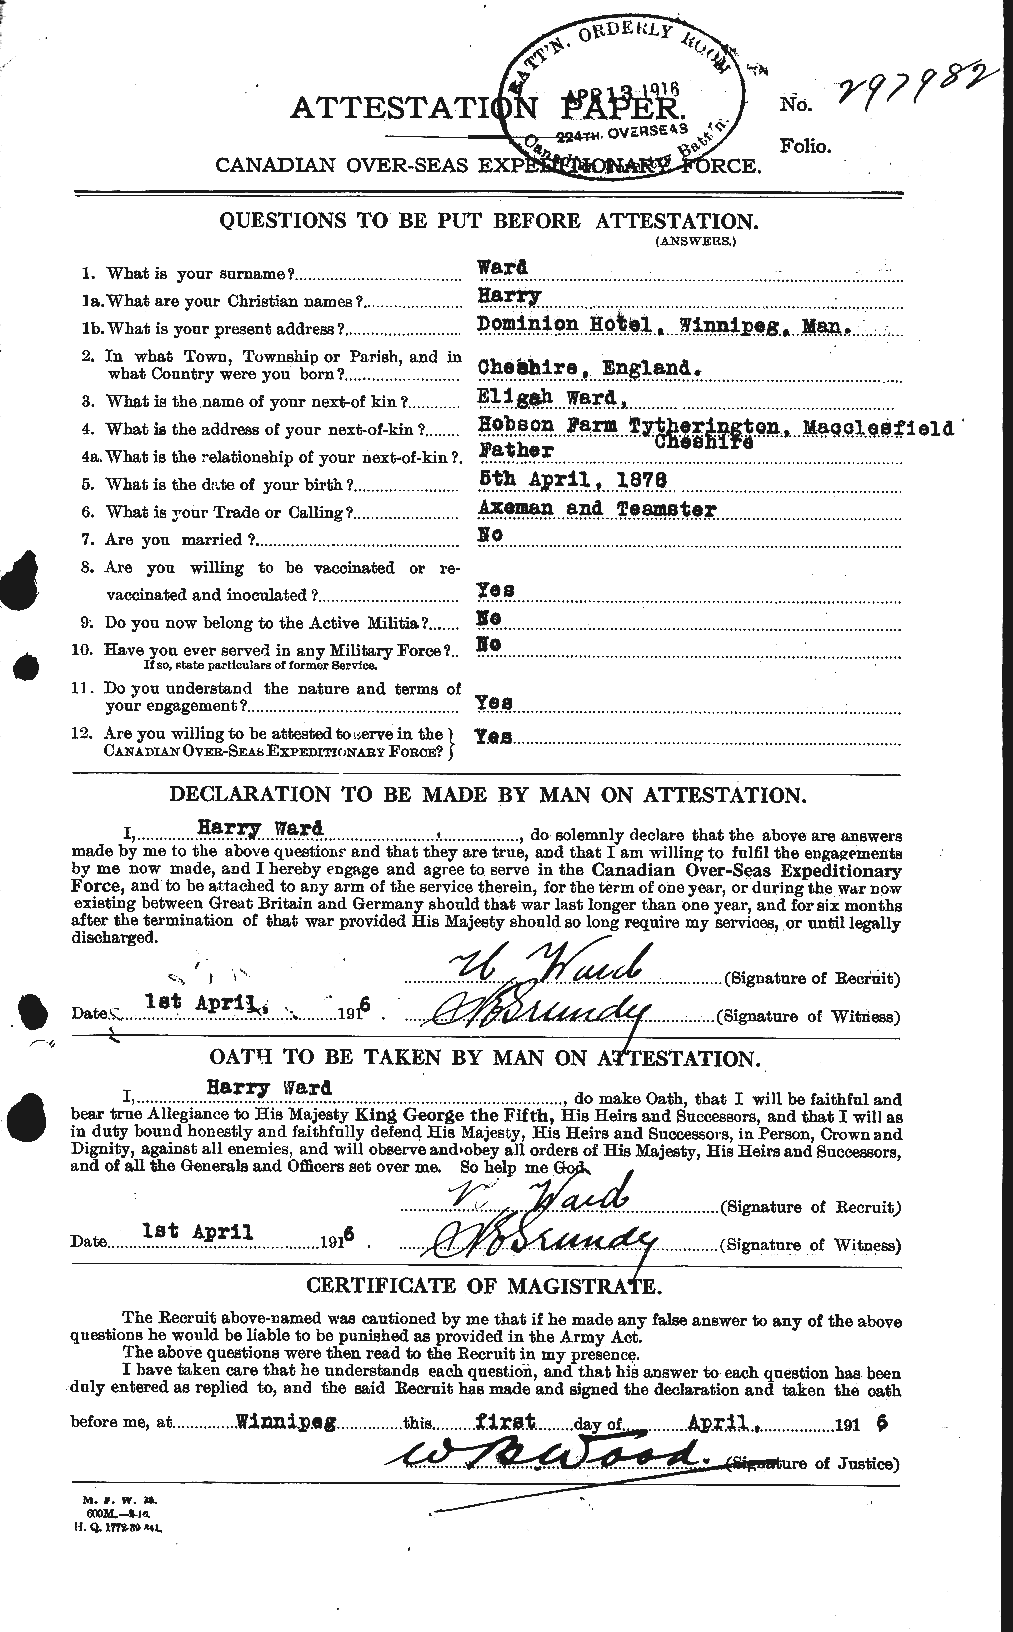 Personnel Records of the First World War - CEF 657807a